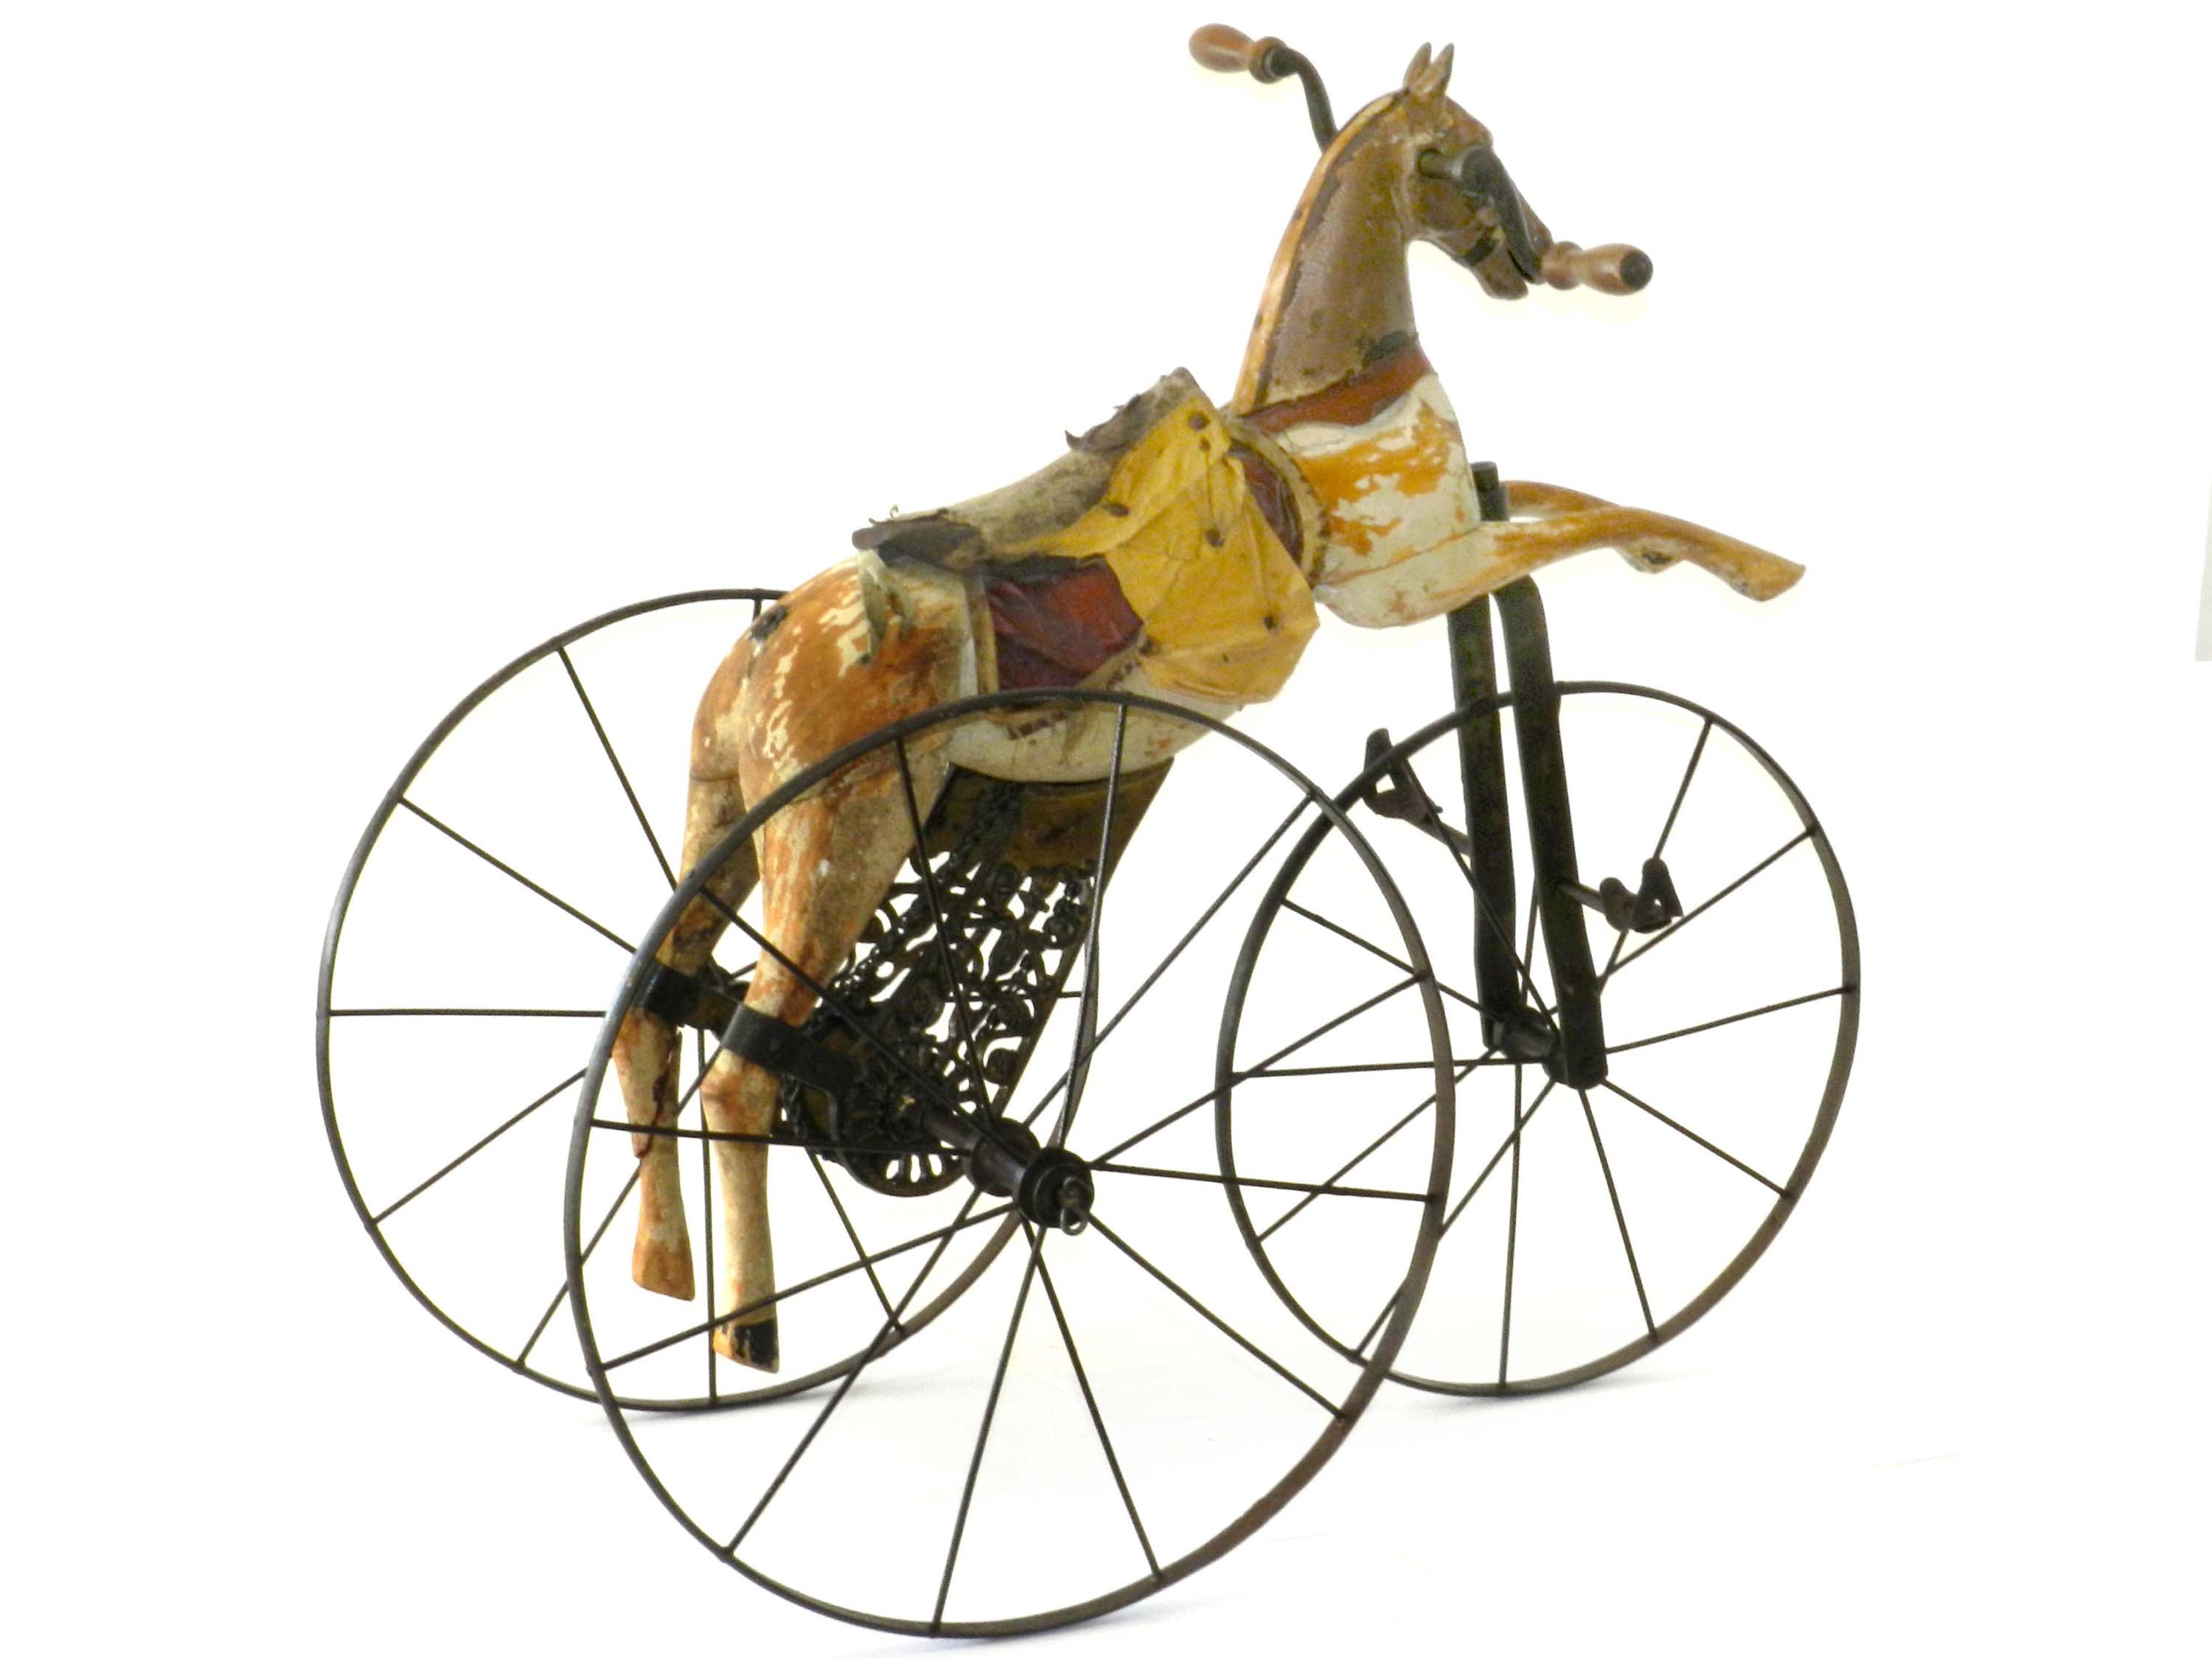 Antique French Velocipede Toy Horse Tricycle c.1870 - Image 3 of 3